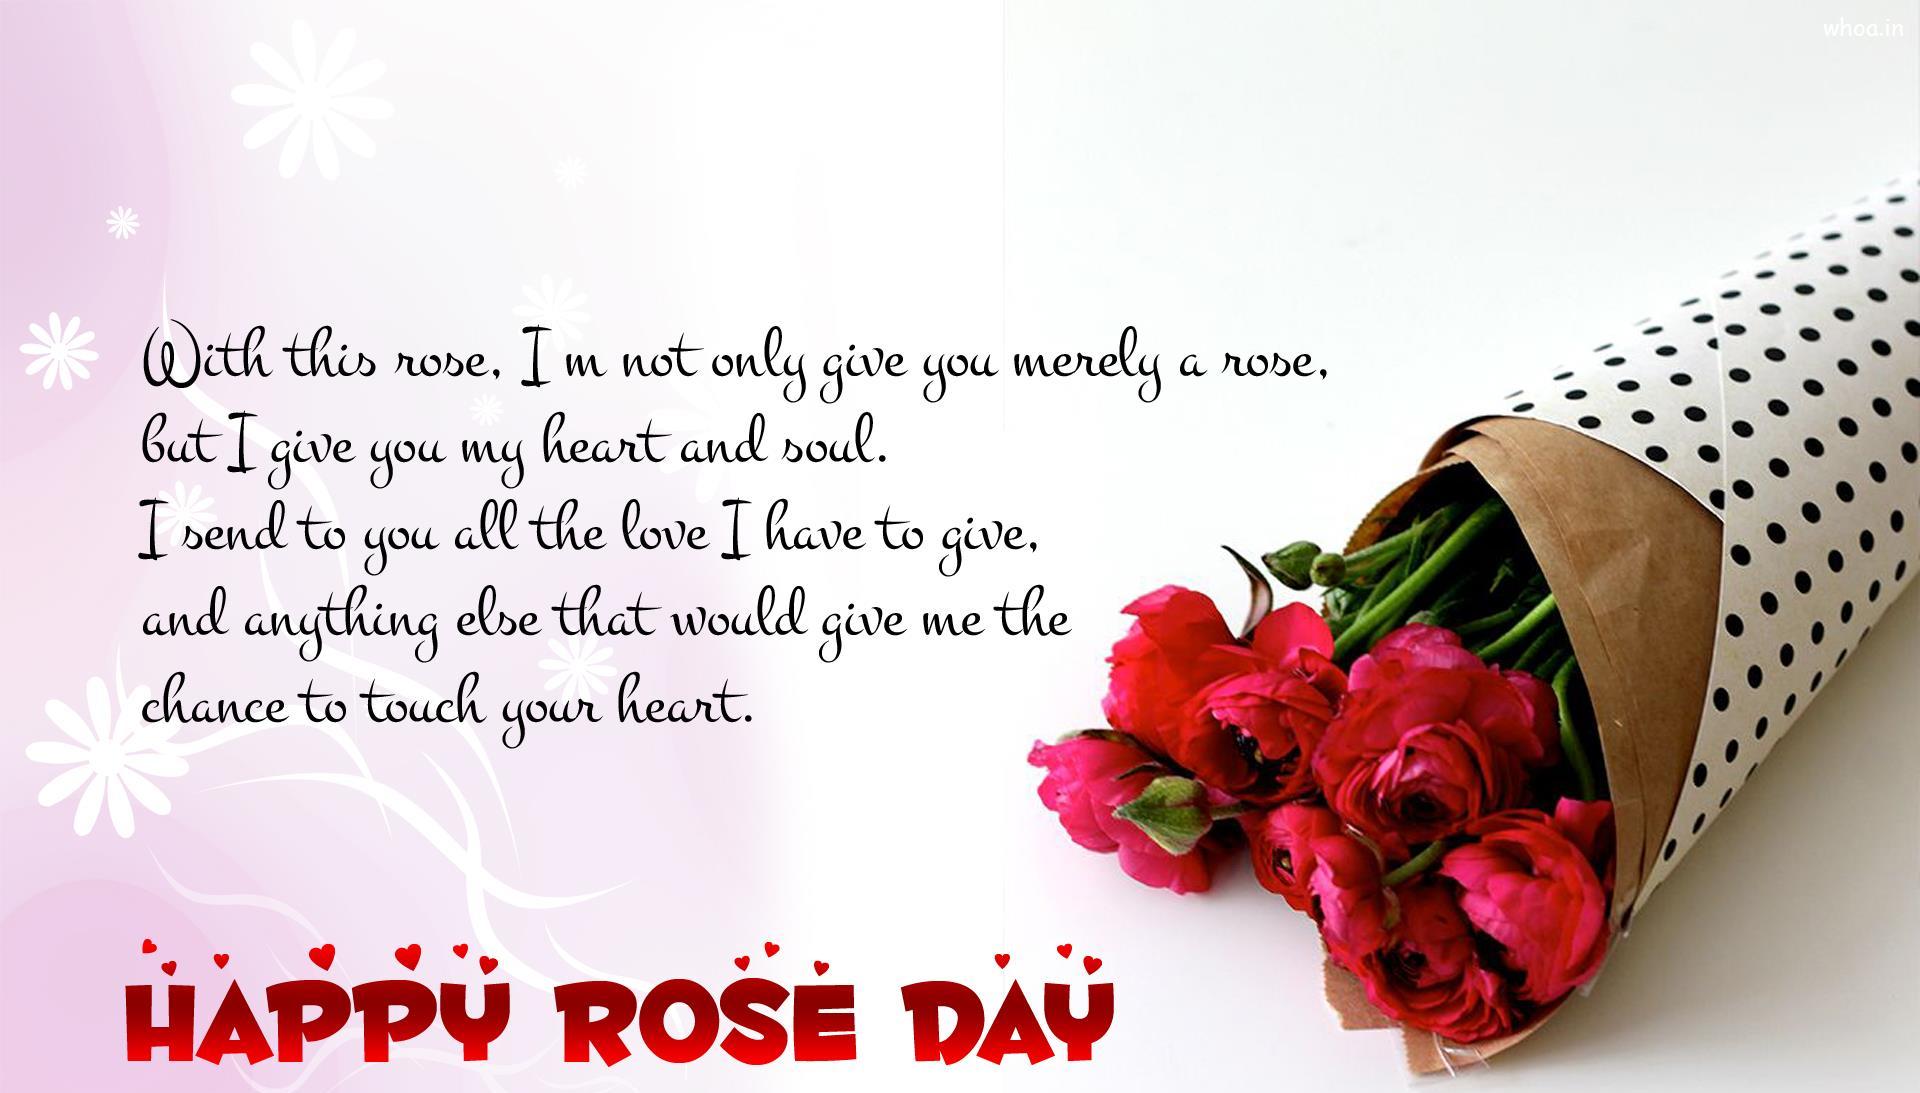 Happy-Rose-Day-Greetings-quotes-wallpaper.